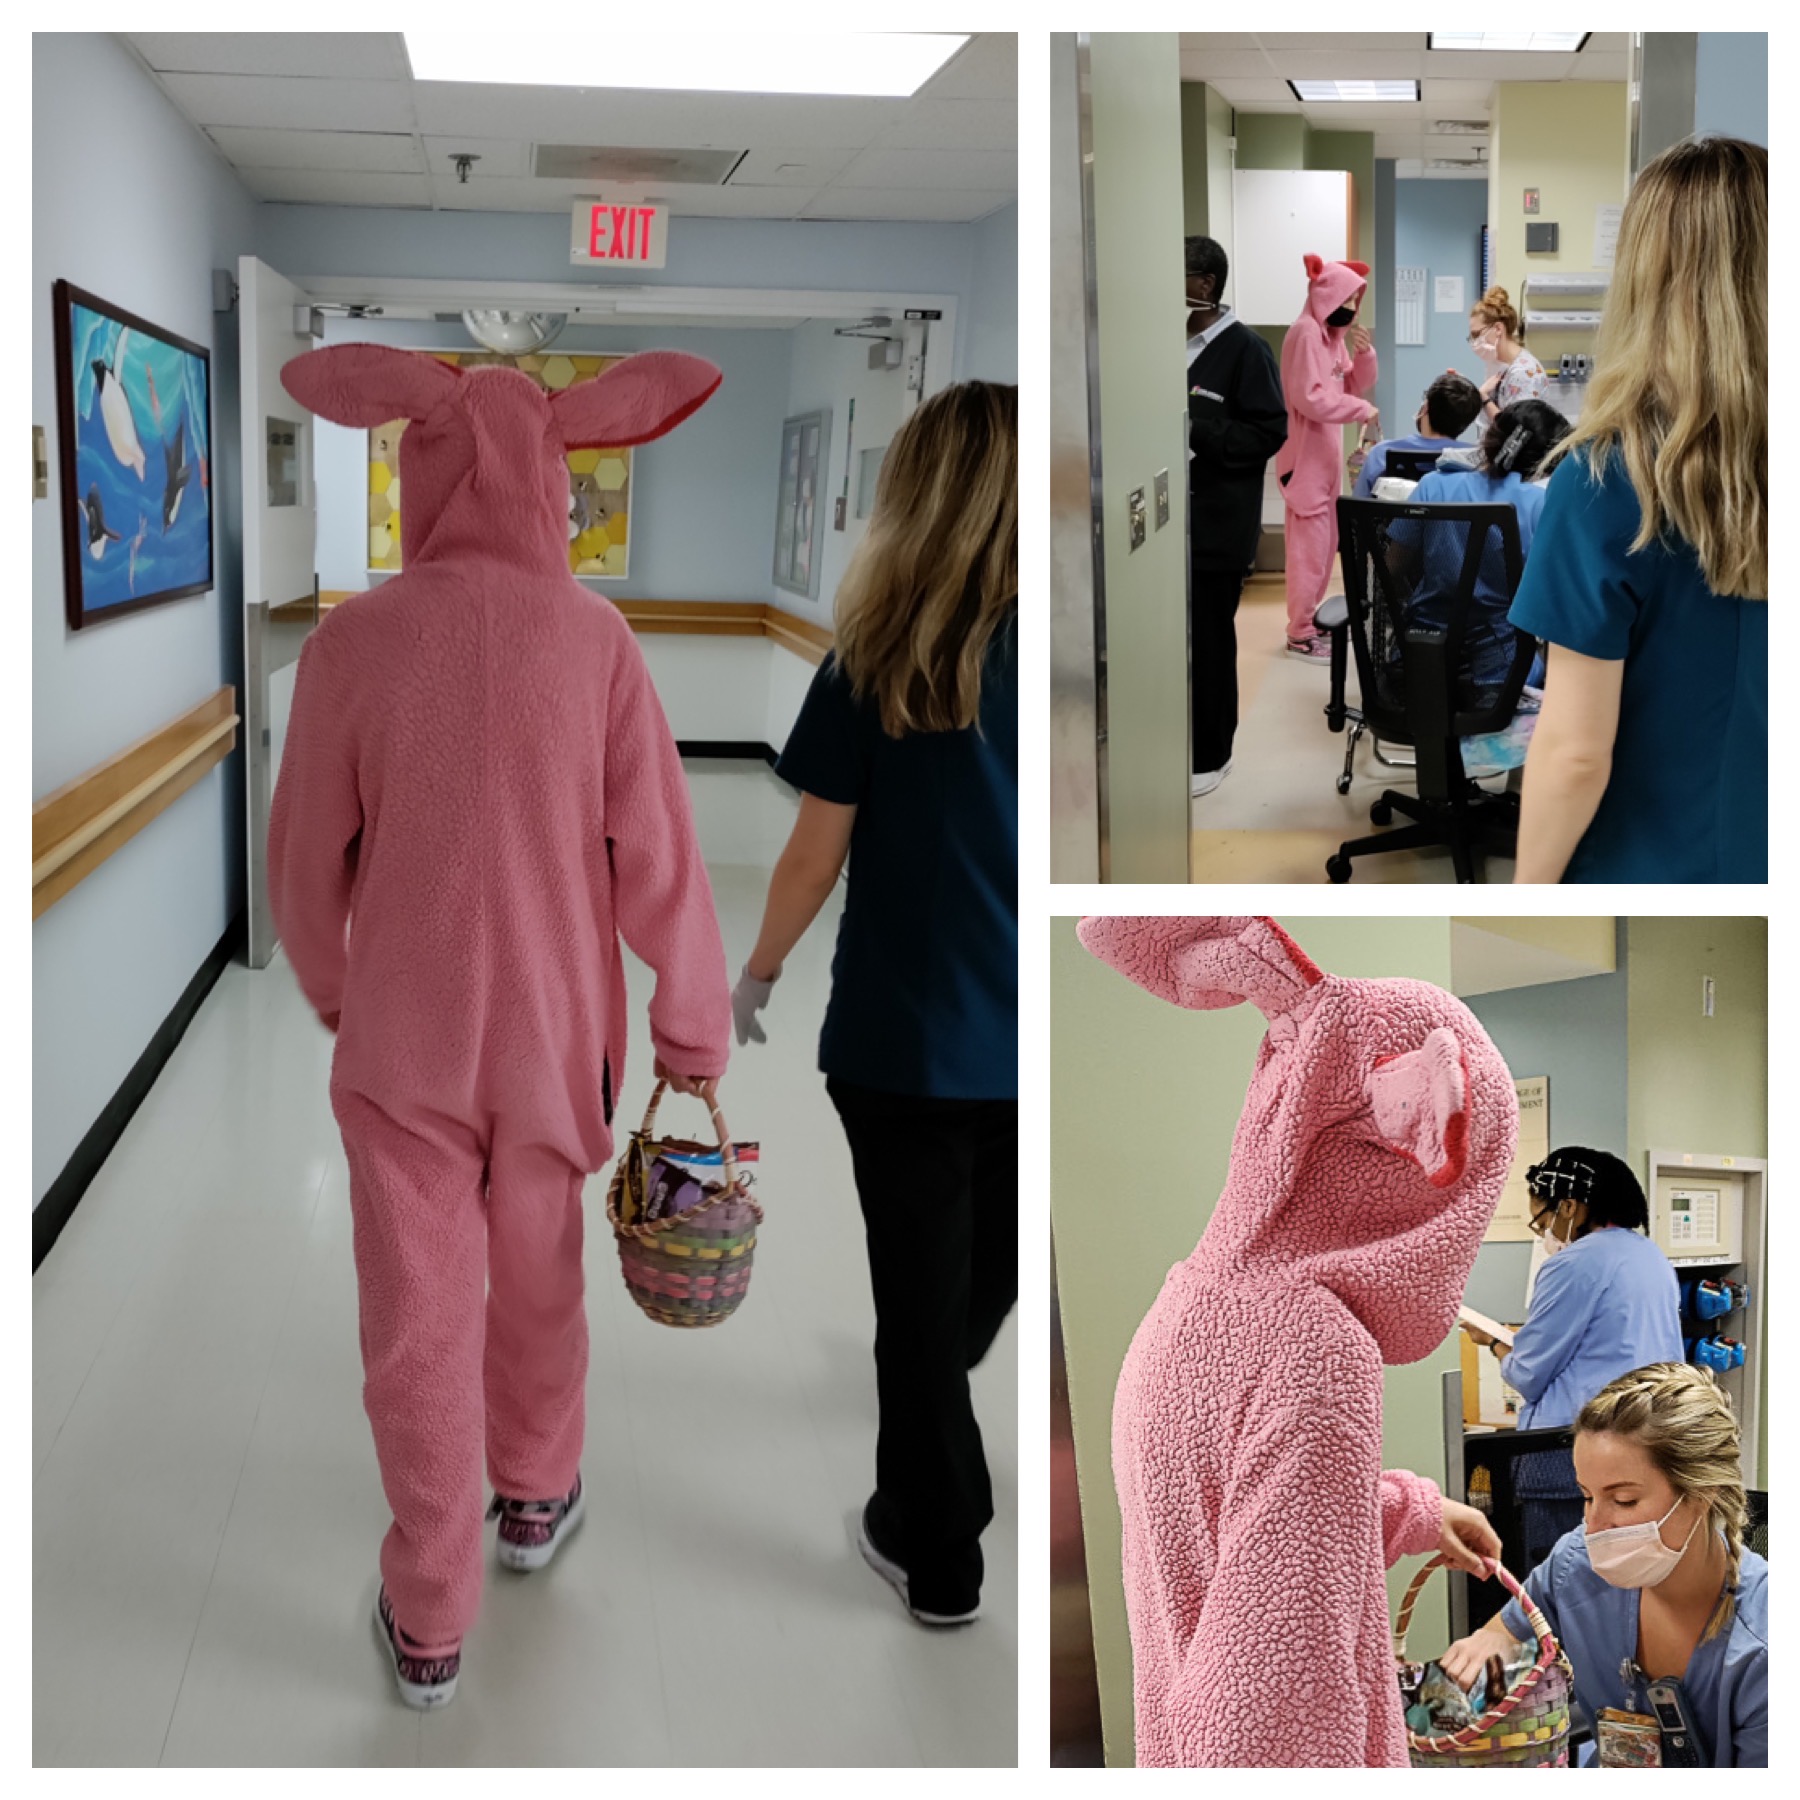 3 photos of Micah wearing a pink bunny suit giving candy to nurses